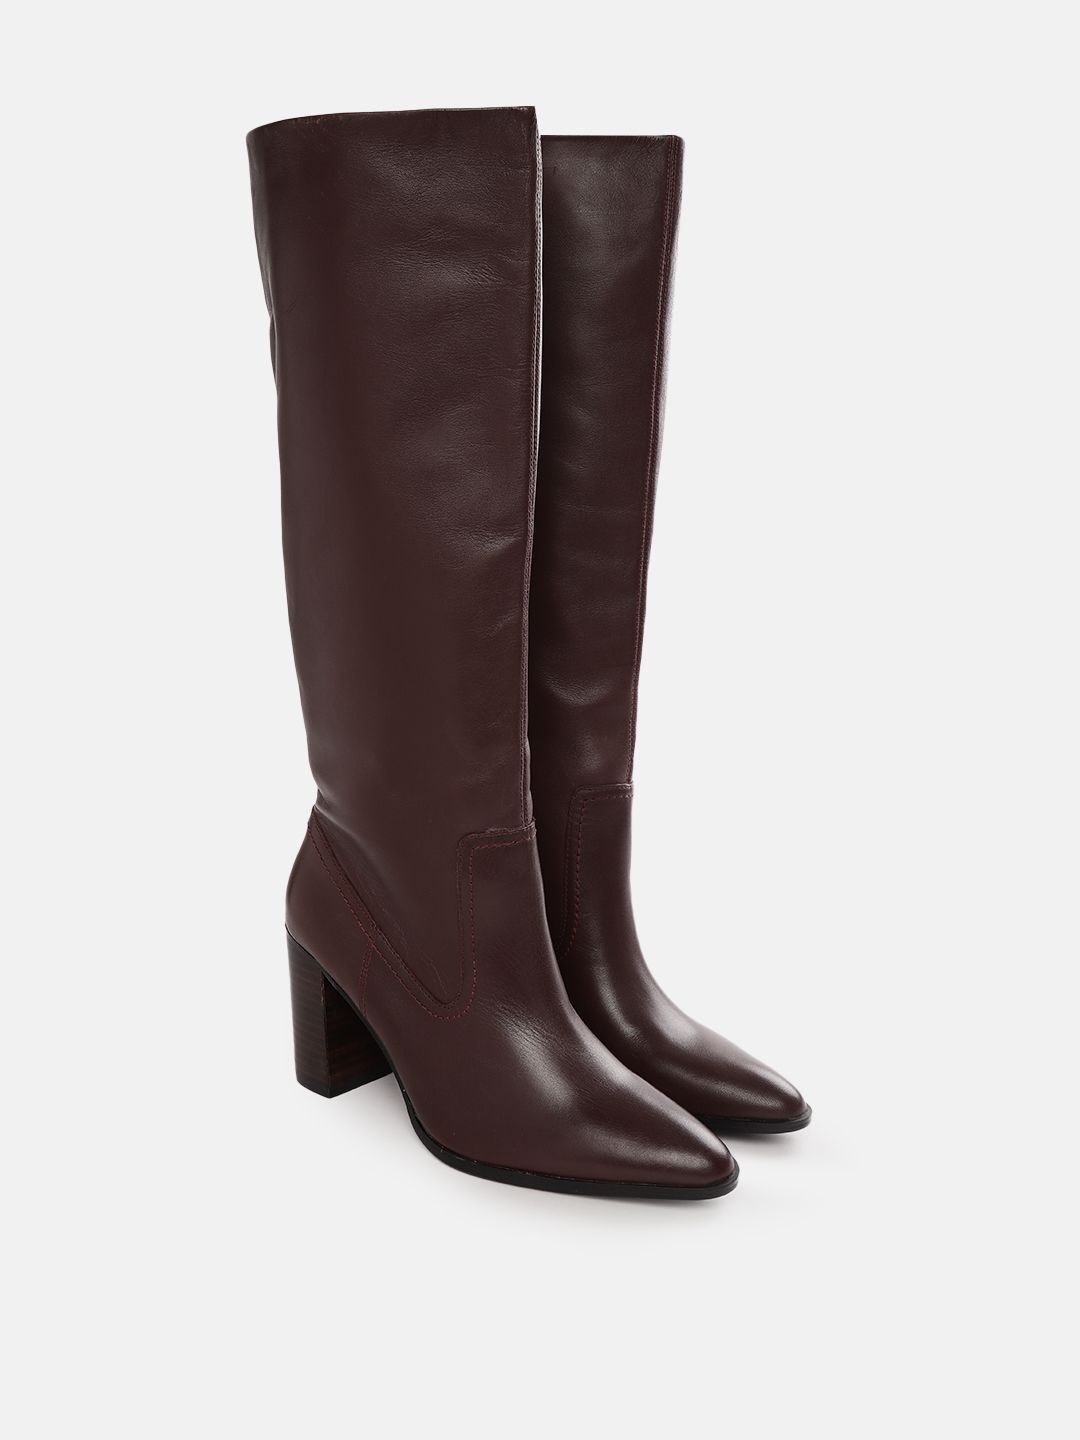 MANGO Women Burgundy Solid High-Top Block Heeled Boots Price in India